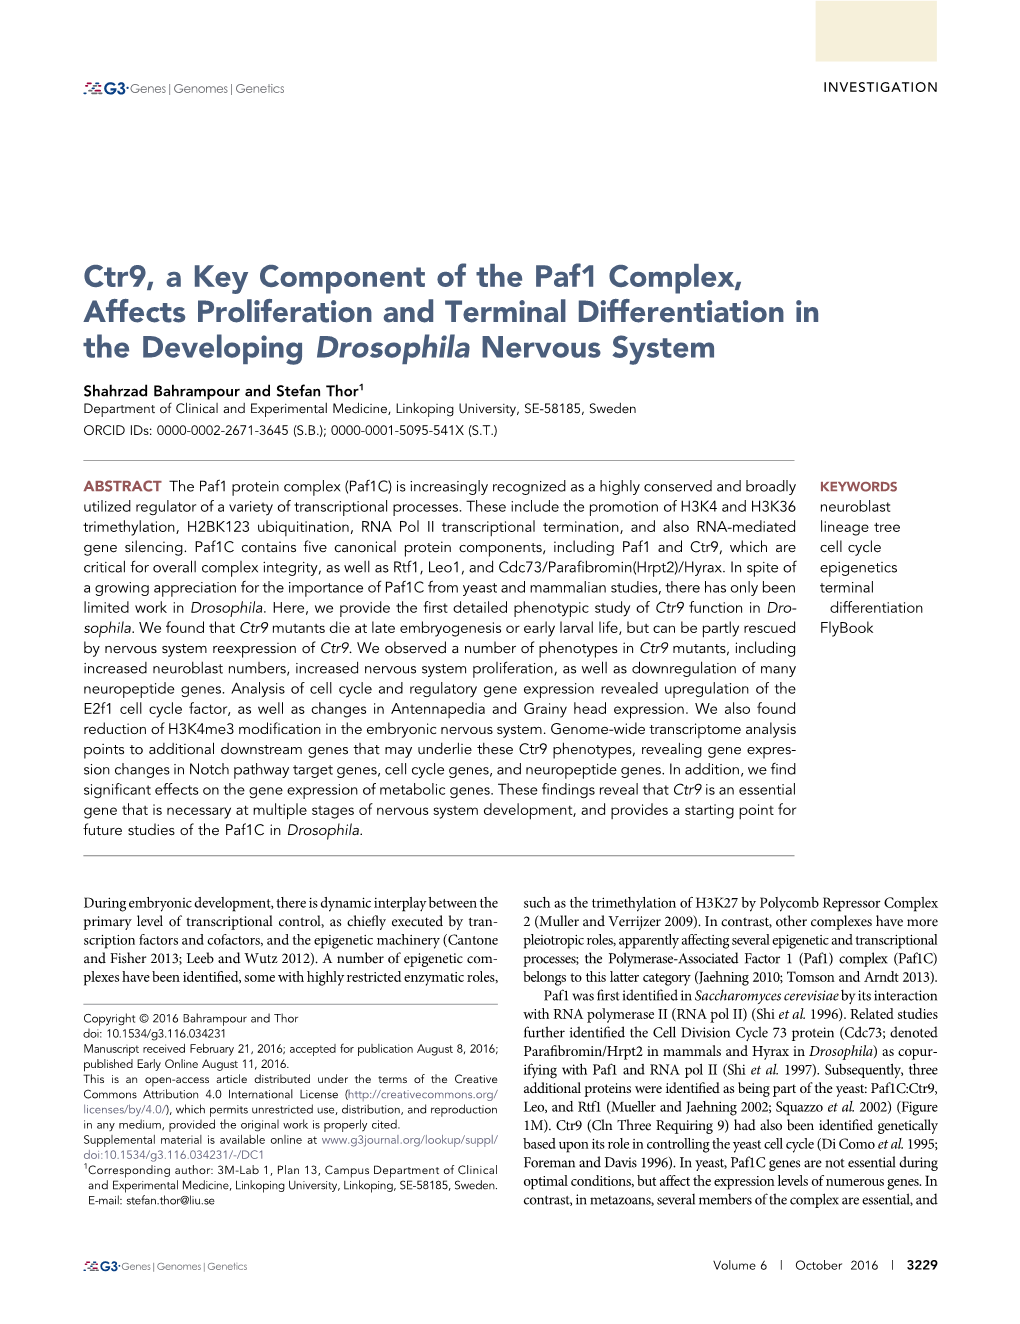 Ctr9, a Key Component of the Paf1 Complex, Affects Proliferation and Terminal Differentiation in the Developing Drosophila Nervous System